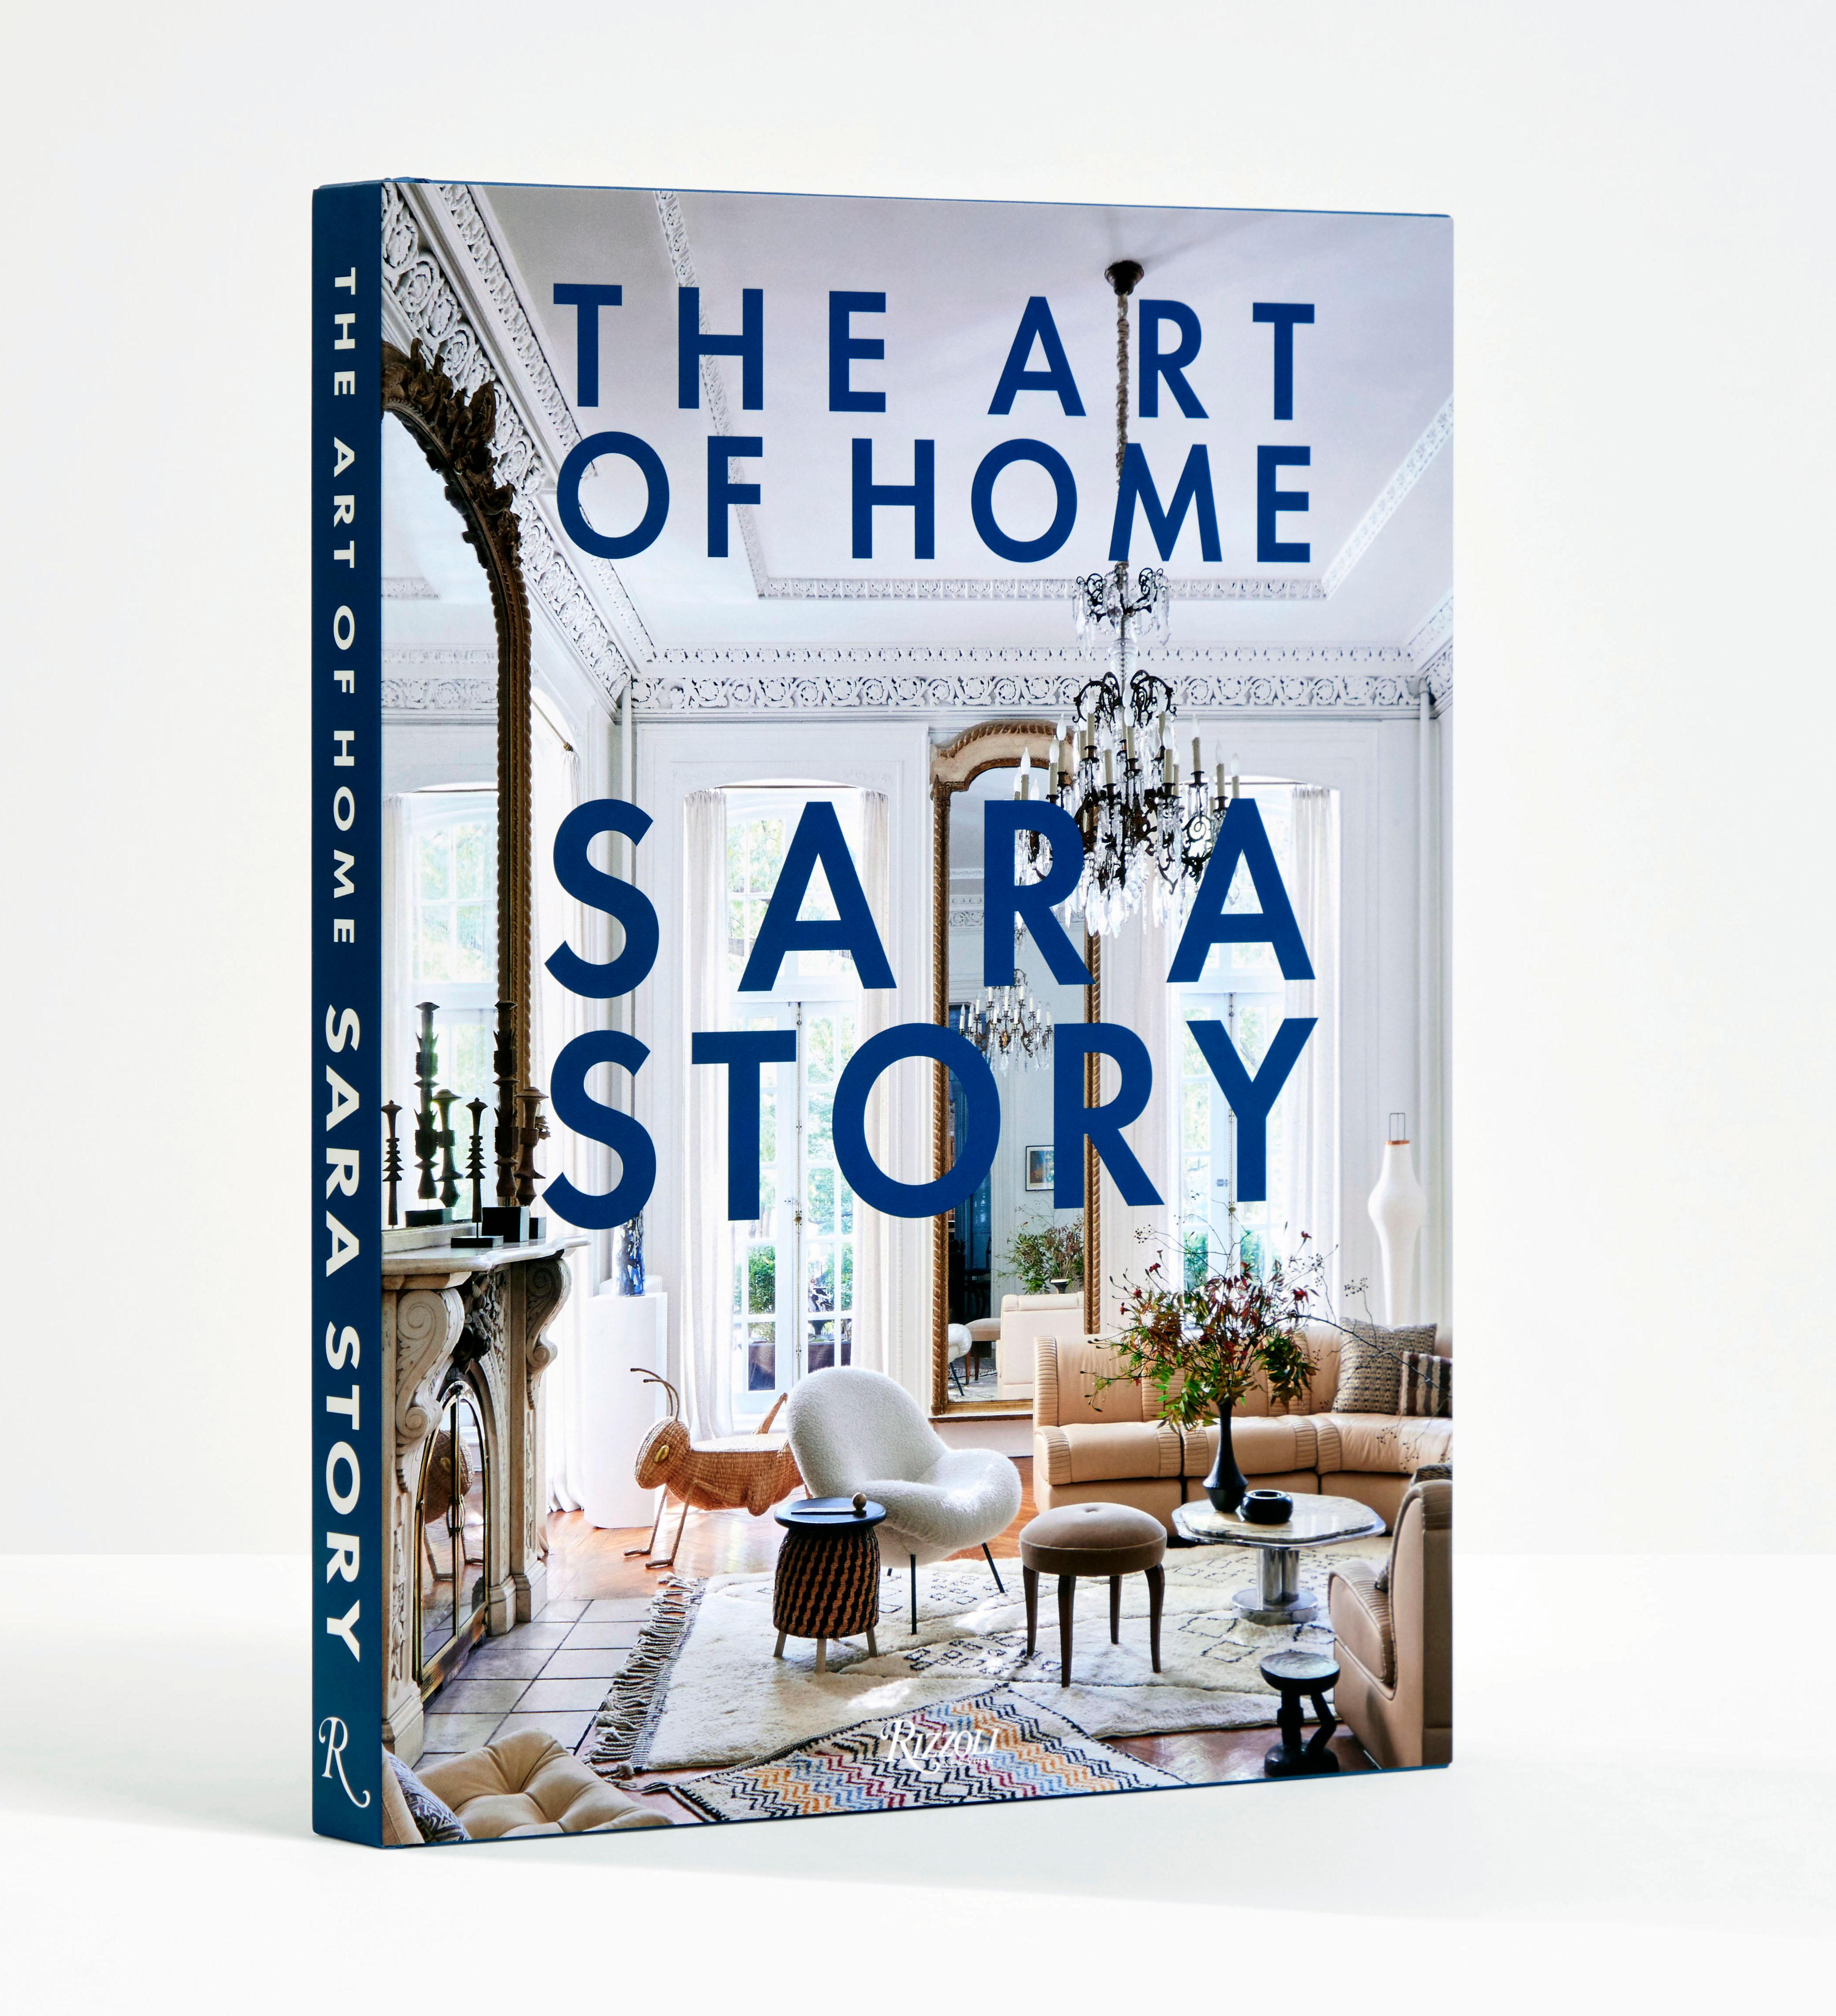 The first book from designer Sara Story, who combines a global bohemian sensibility with a passion for art to curate clean but striking rooms that balance style with adventure.

With a keen eye for art and having spent her childhood in Japan,